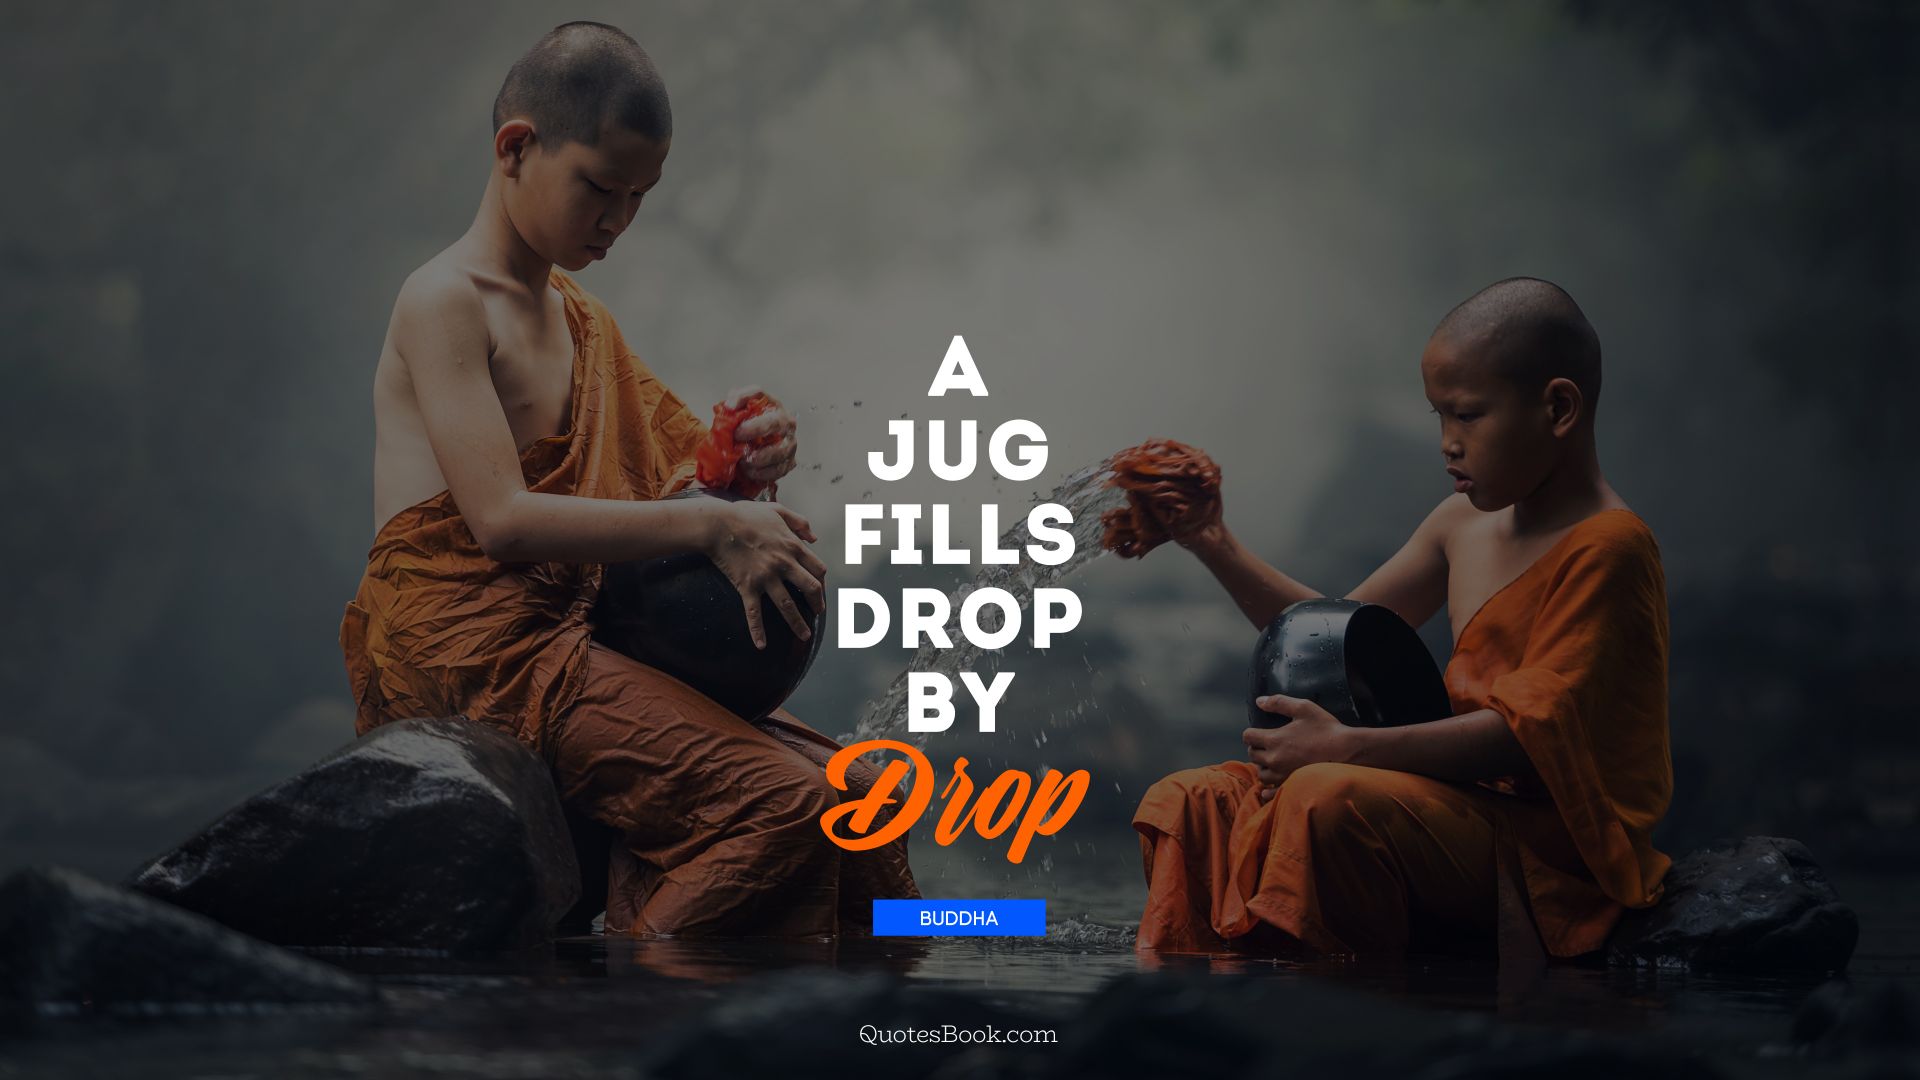 A jug fills drop by drop. - Quote by Buddha